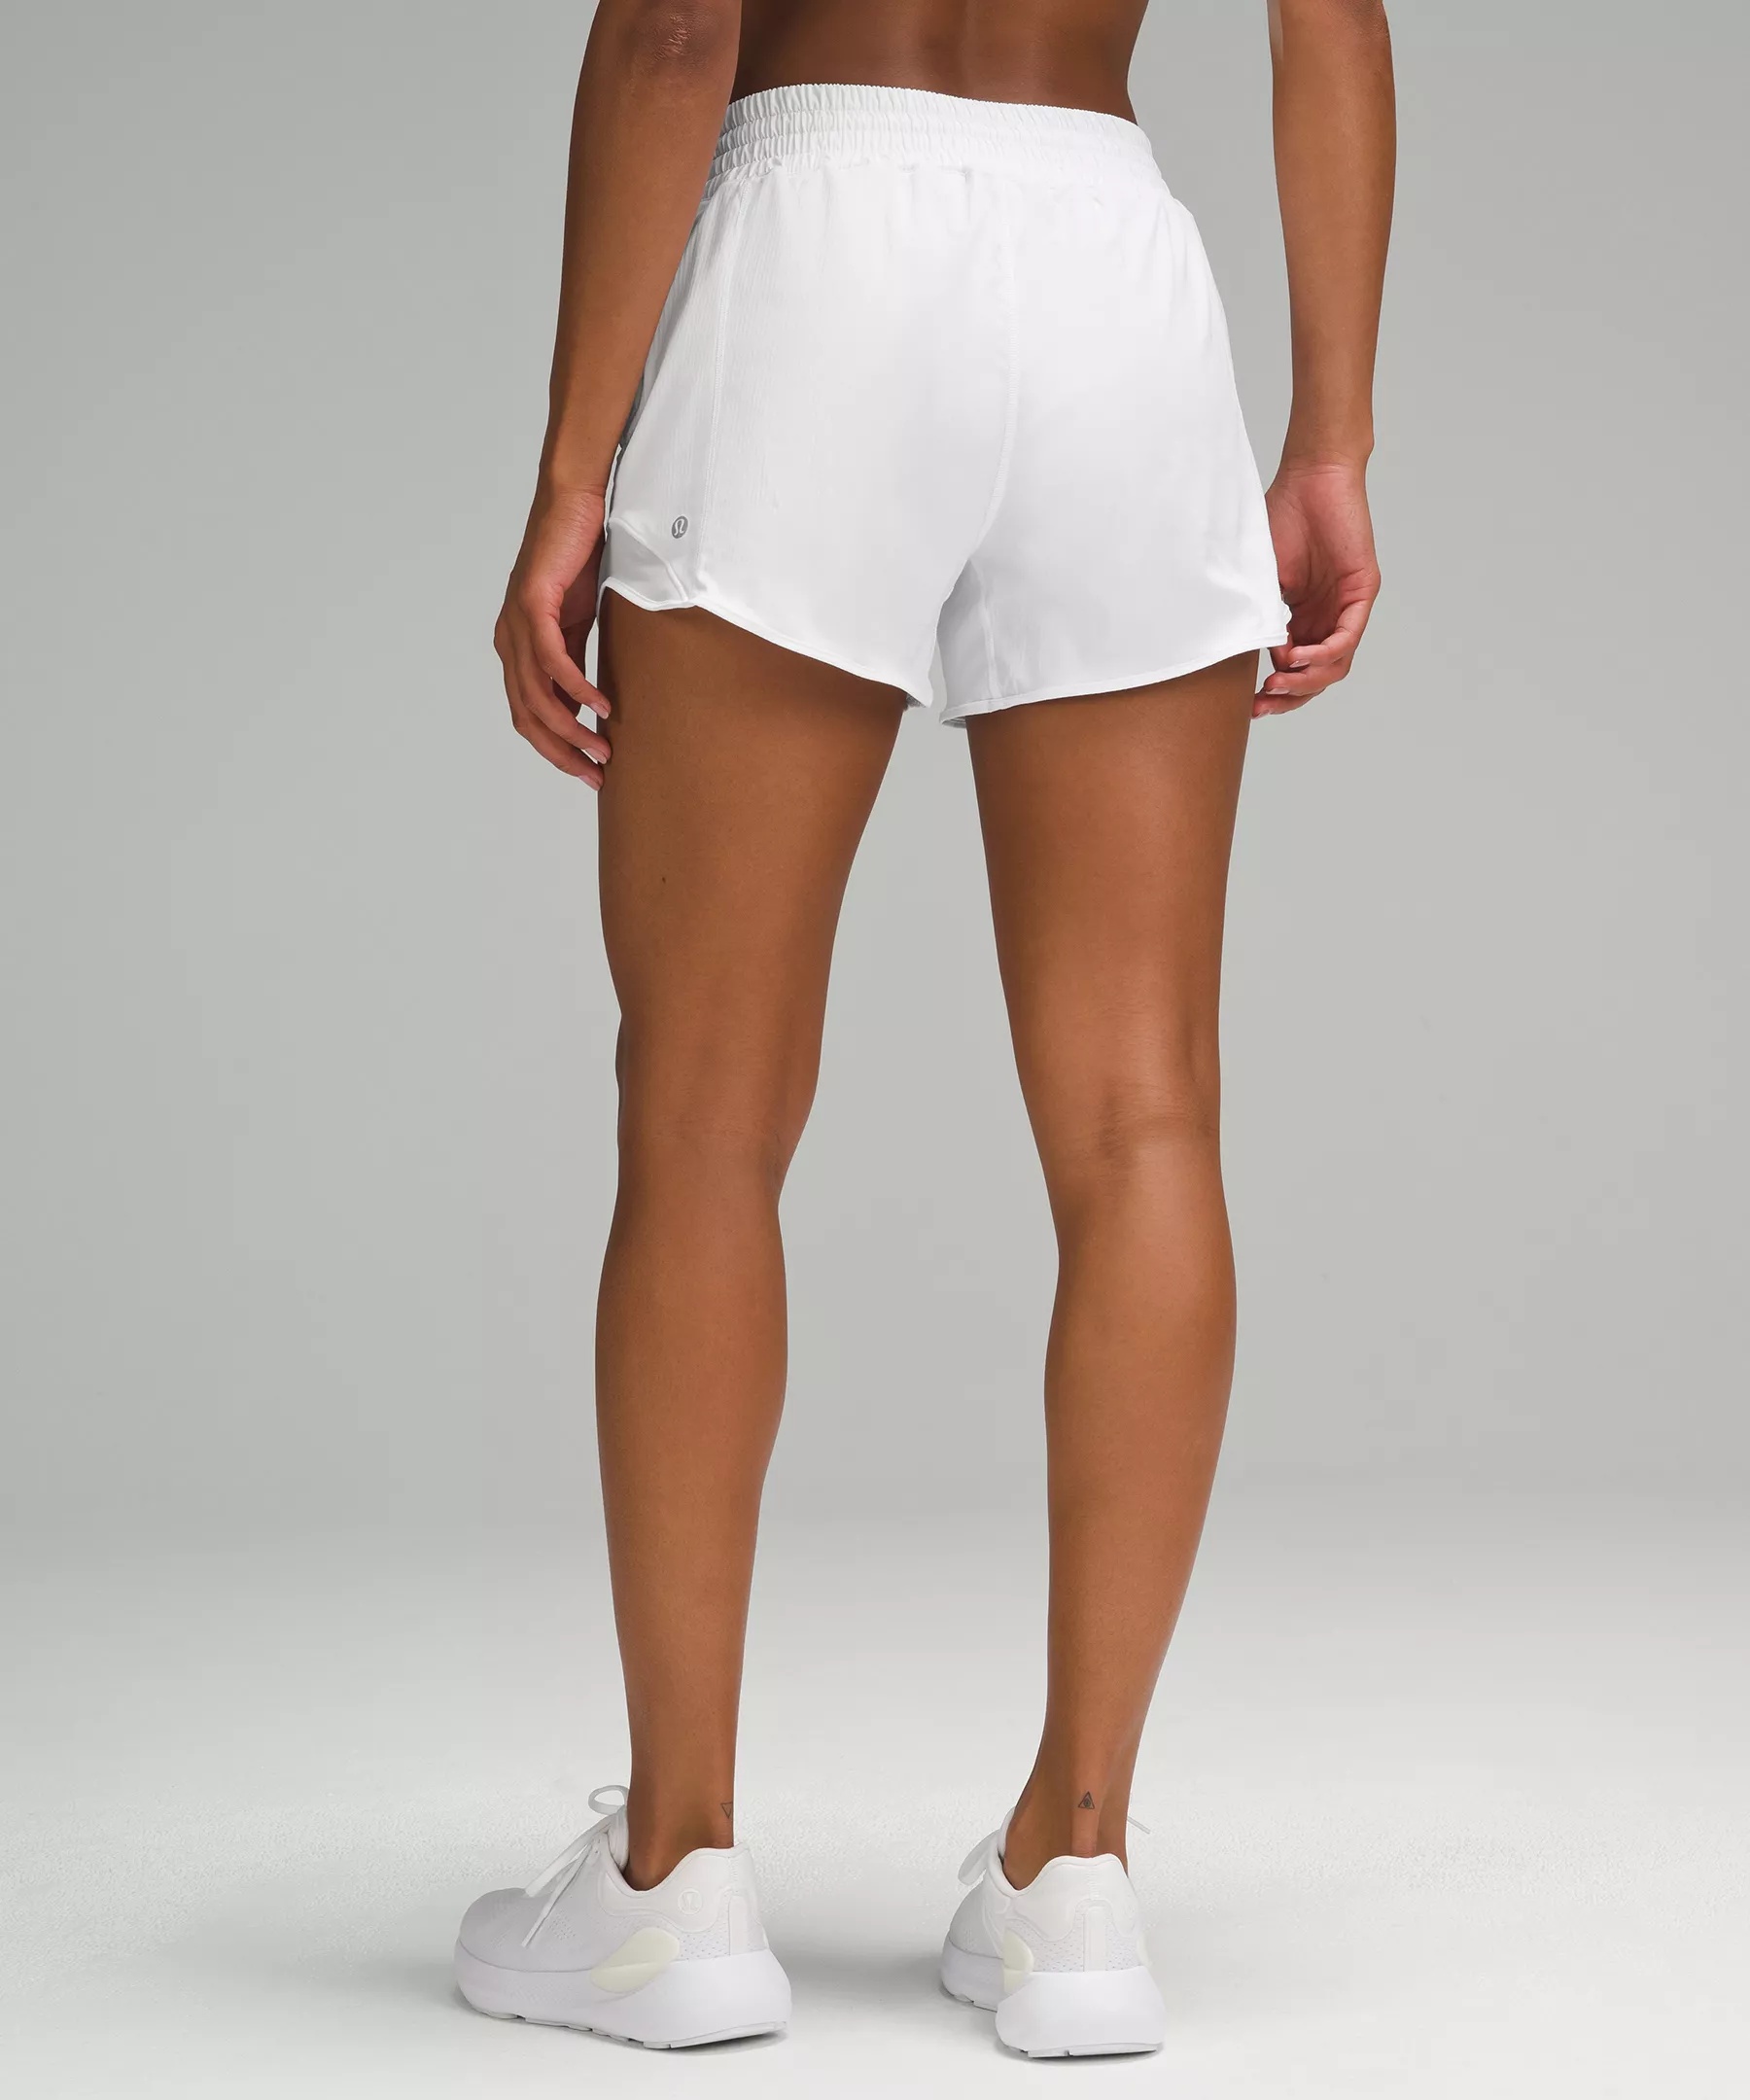 Hotty Hot High-Rise Lined Short 4" - 3